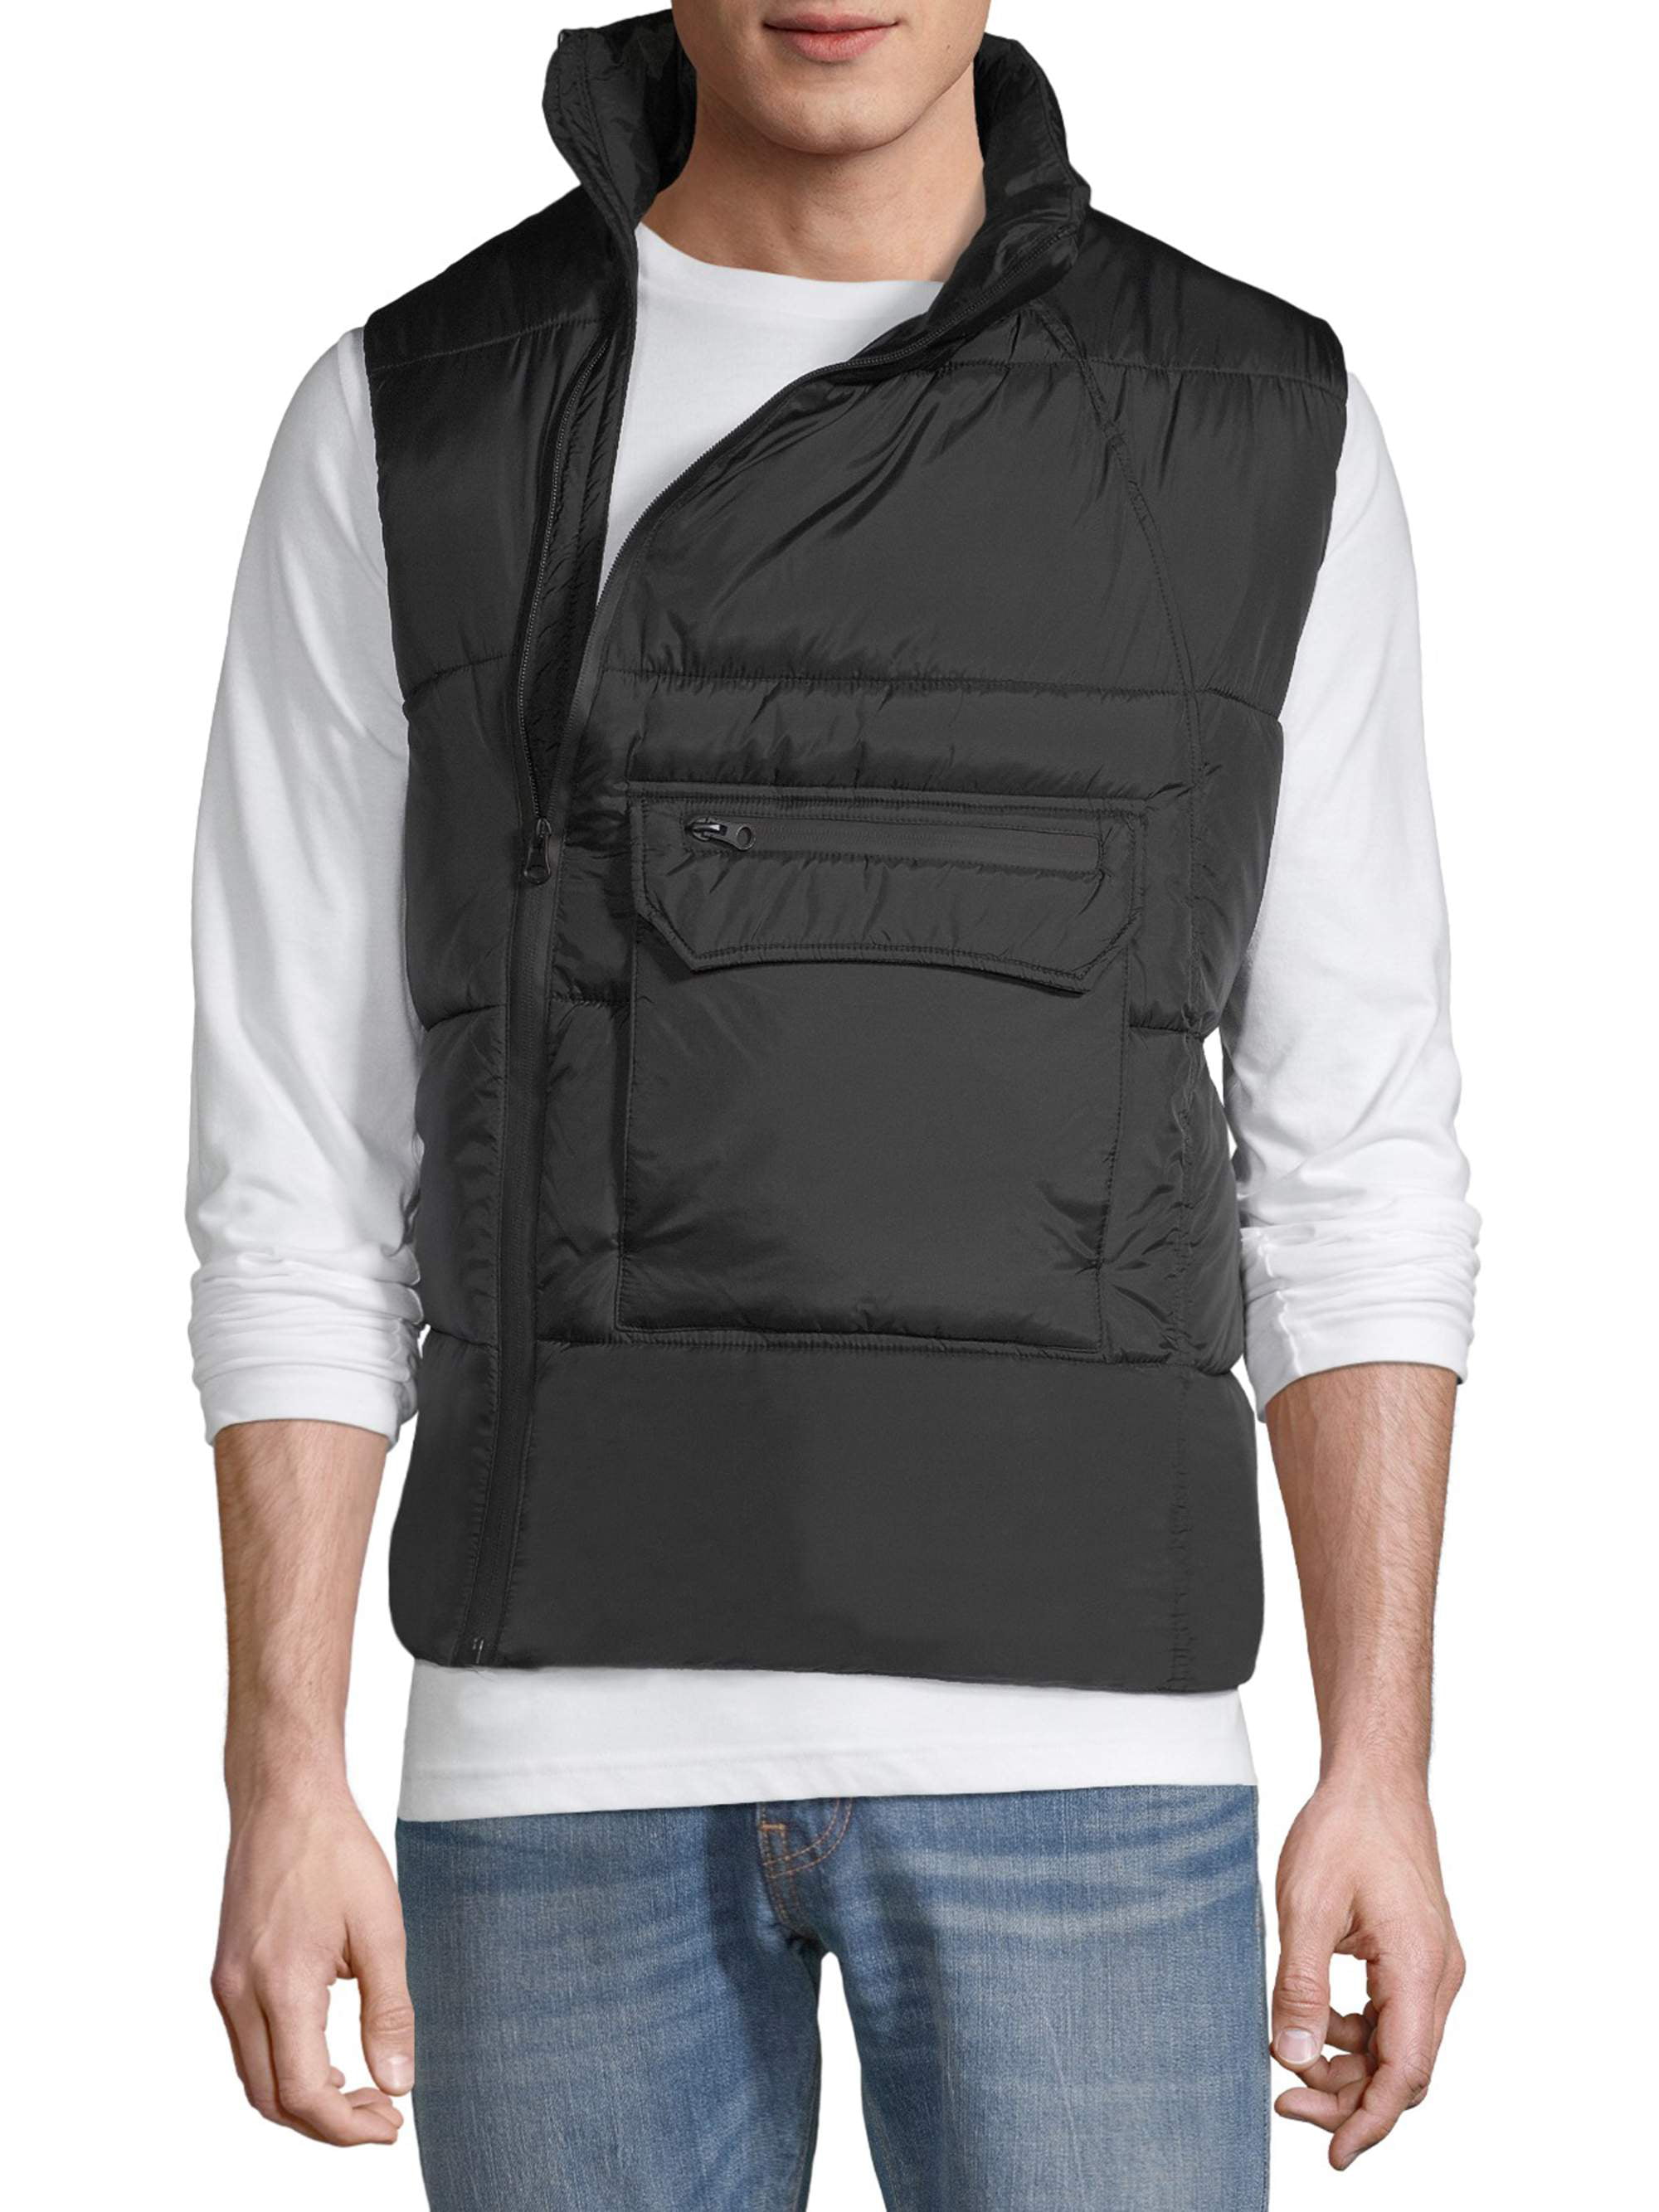 Coto7 Ryan Fing Air Womens Vest 